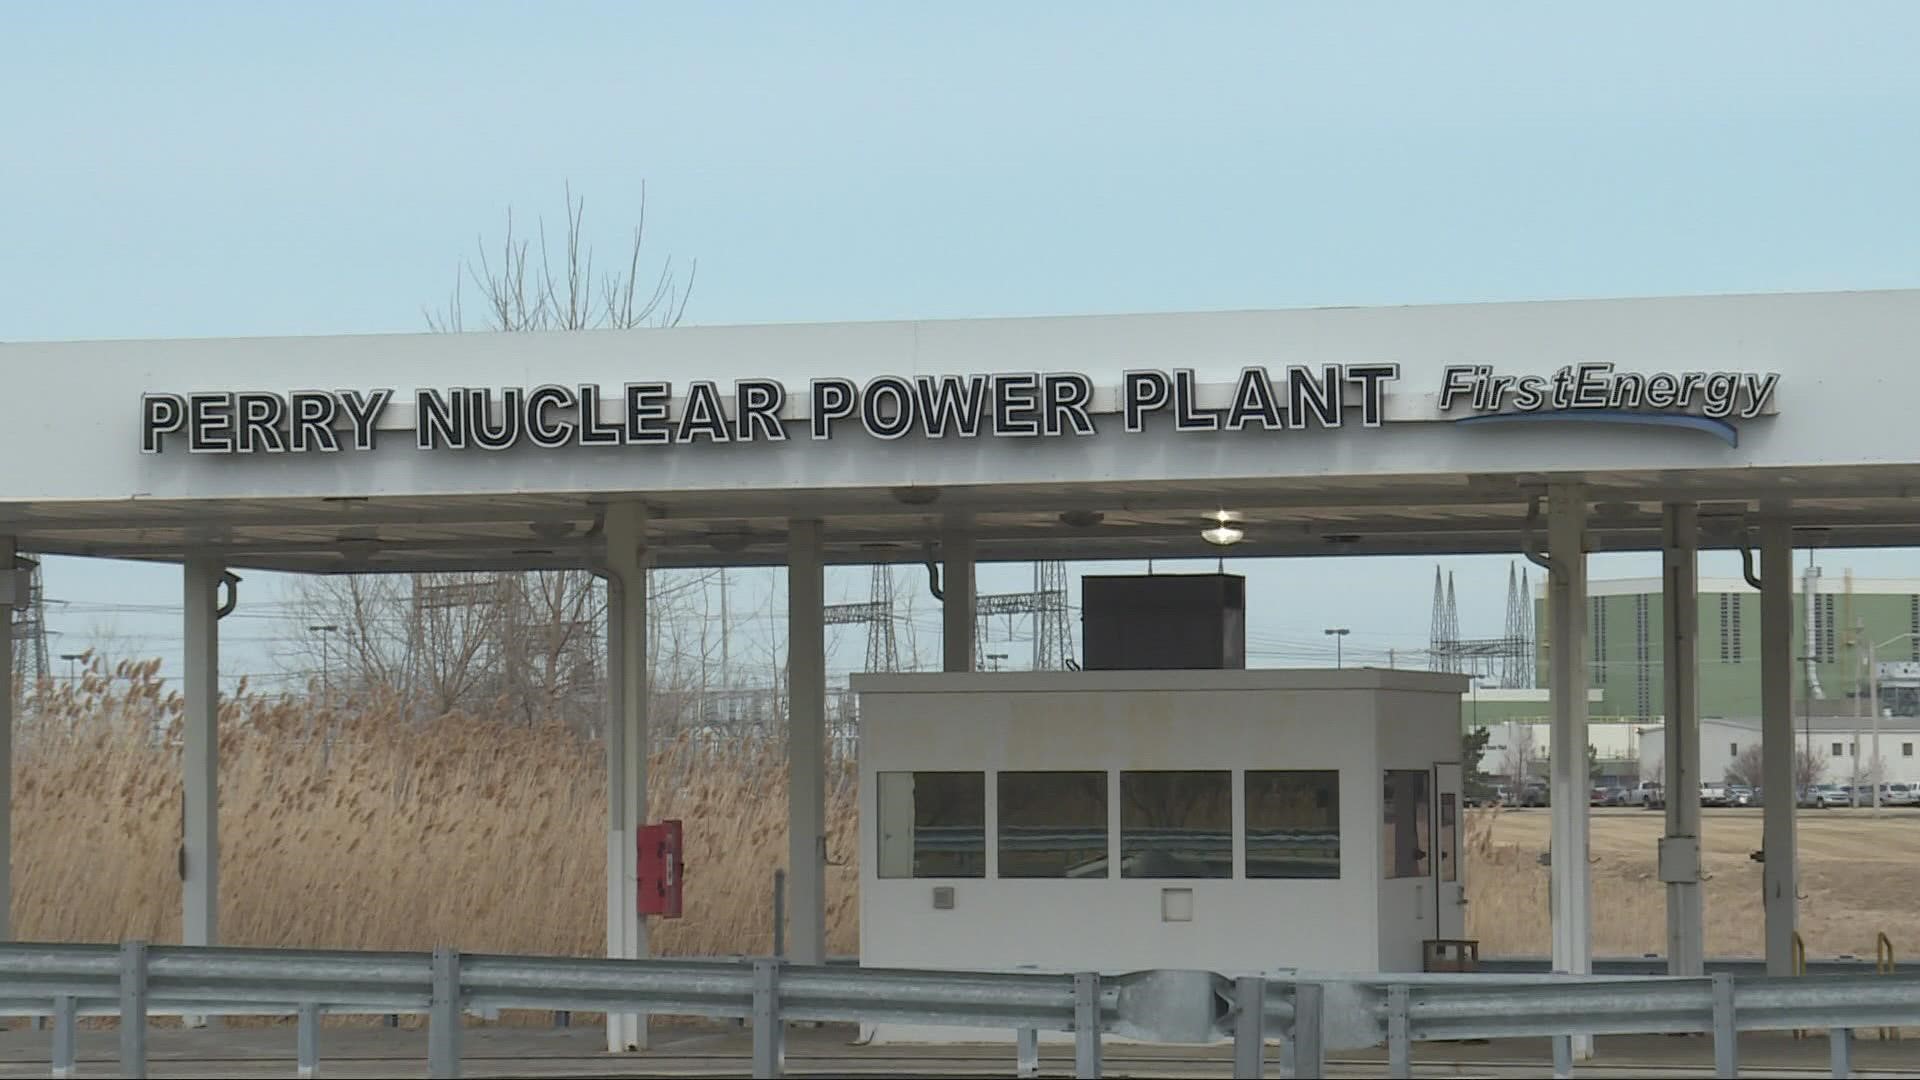 The company’s request will soon be decided by the Public Utilities Commission of Ohio.